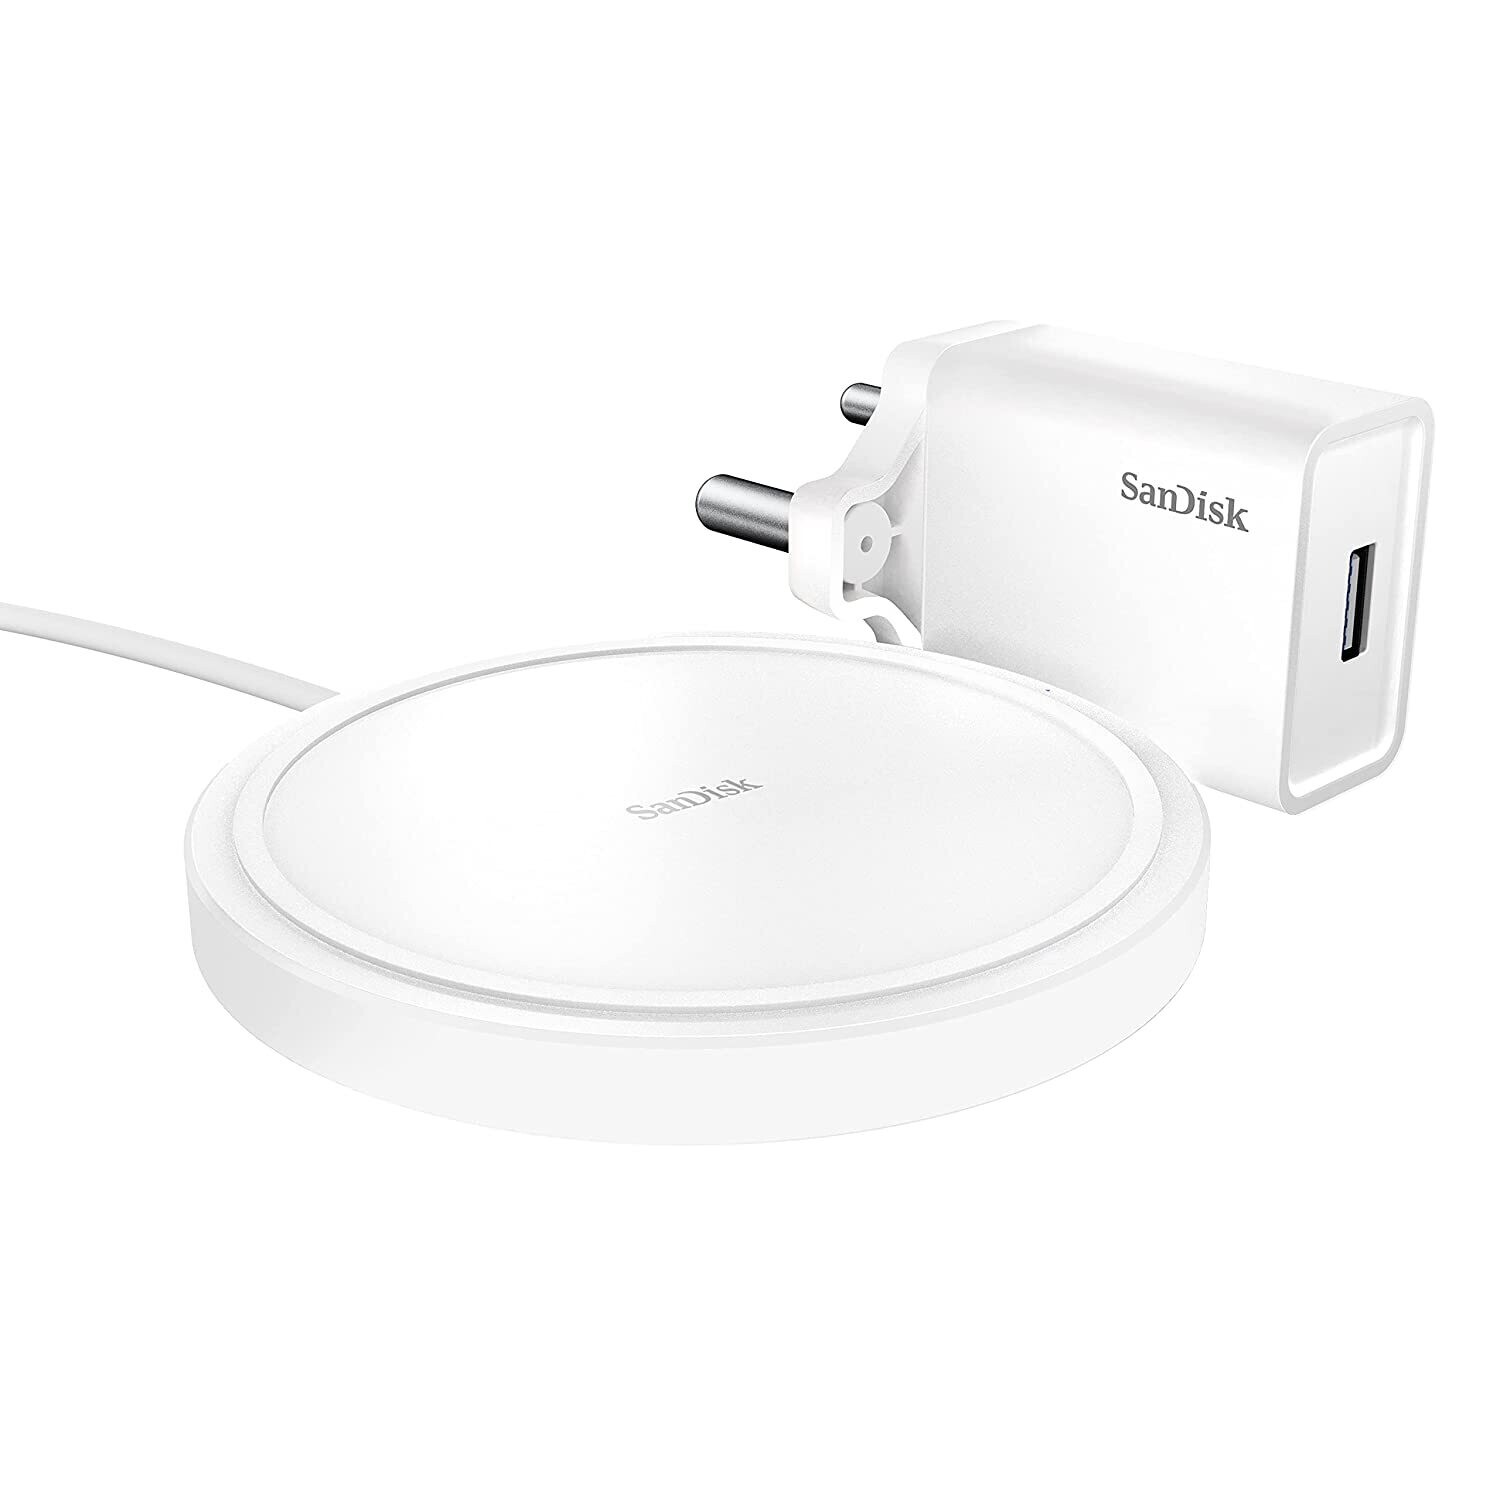 SanDisk iXpand Wireless 15W Charger with QC 3.0 Adapter Included